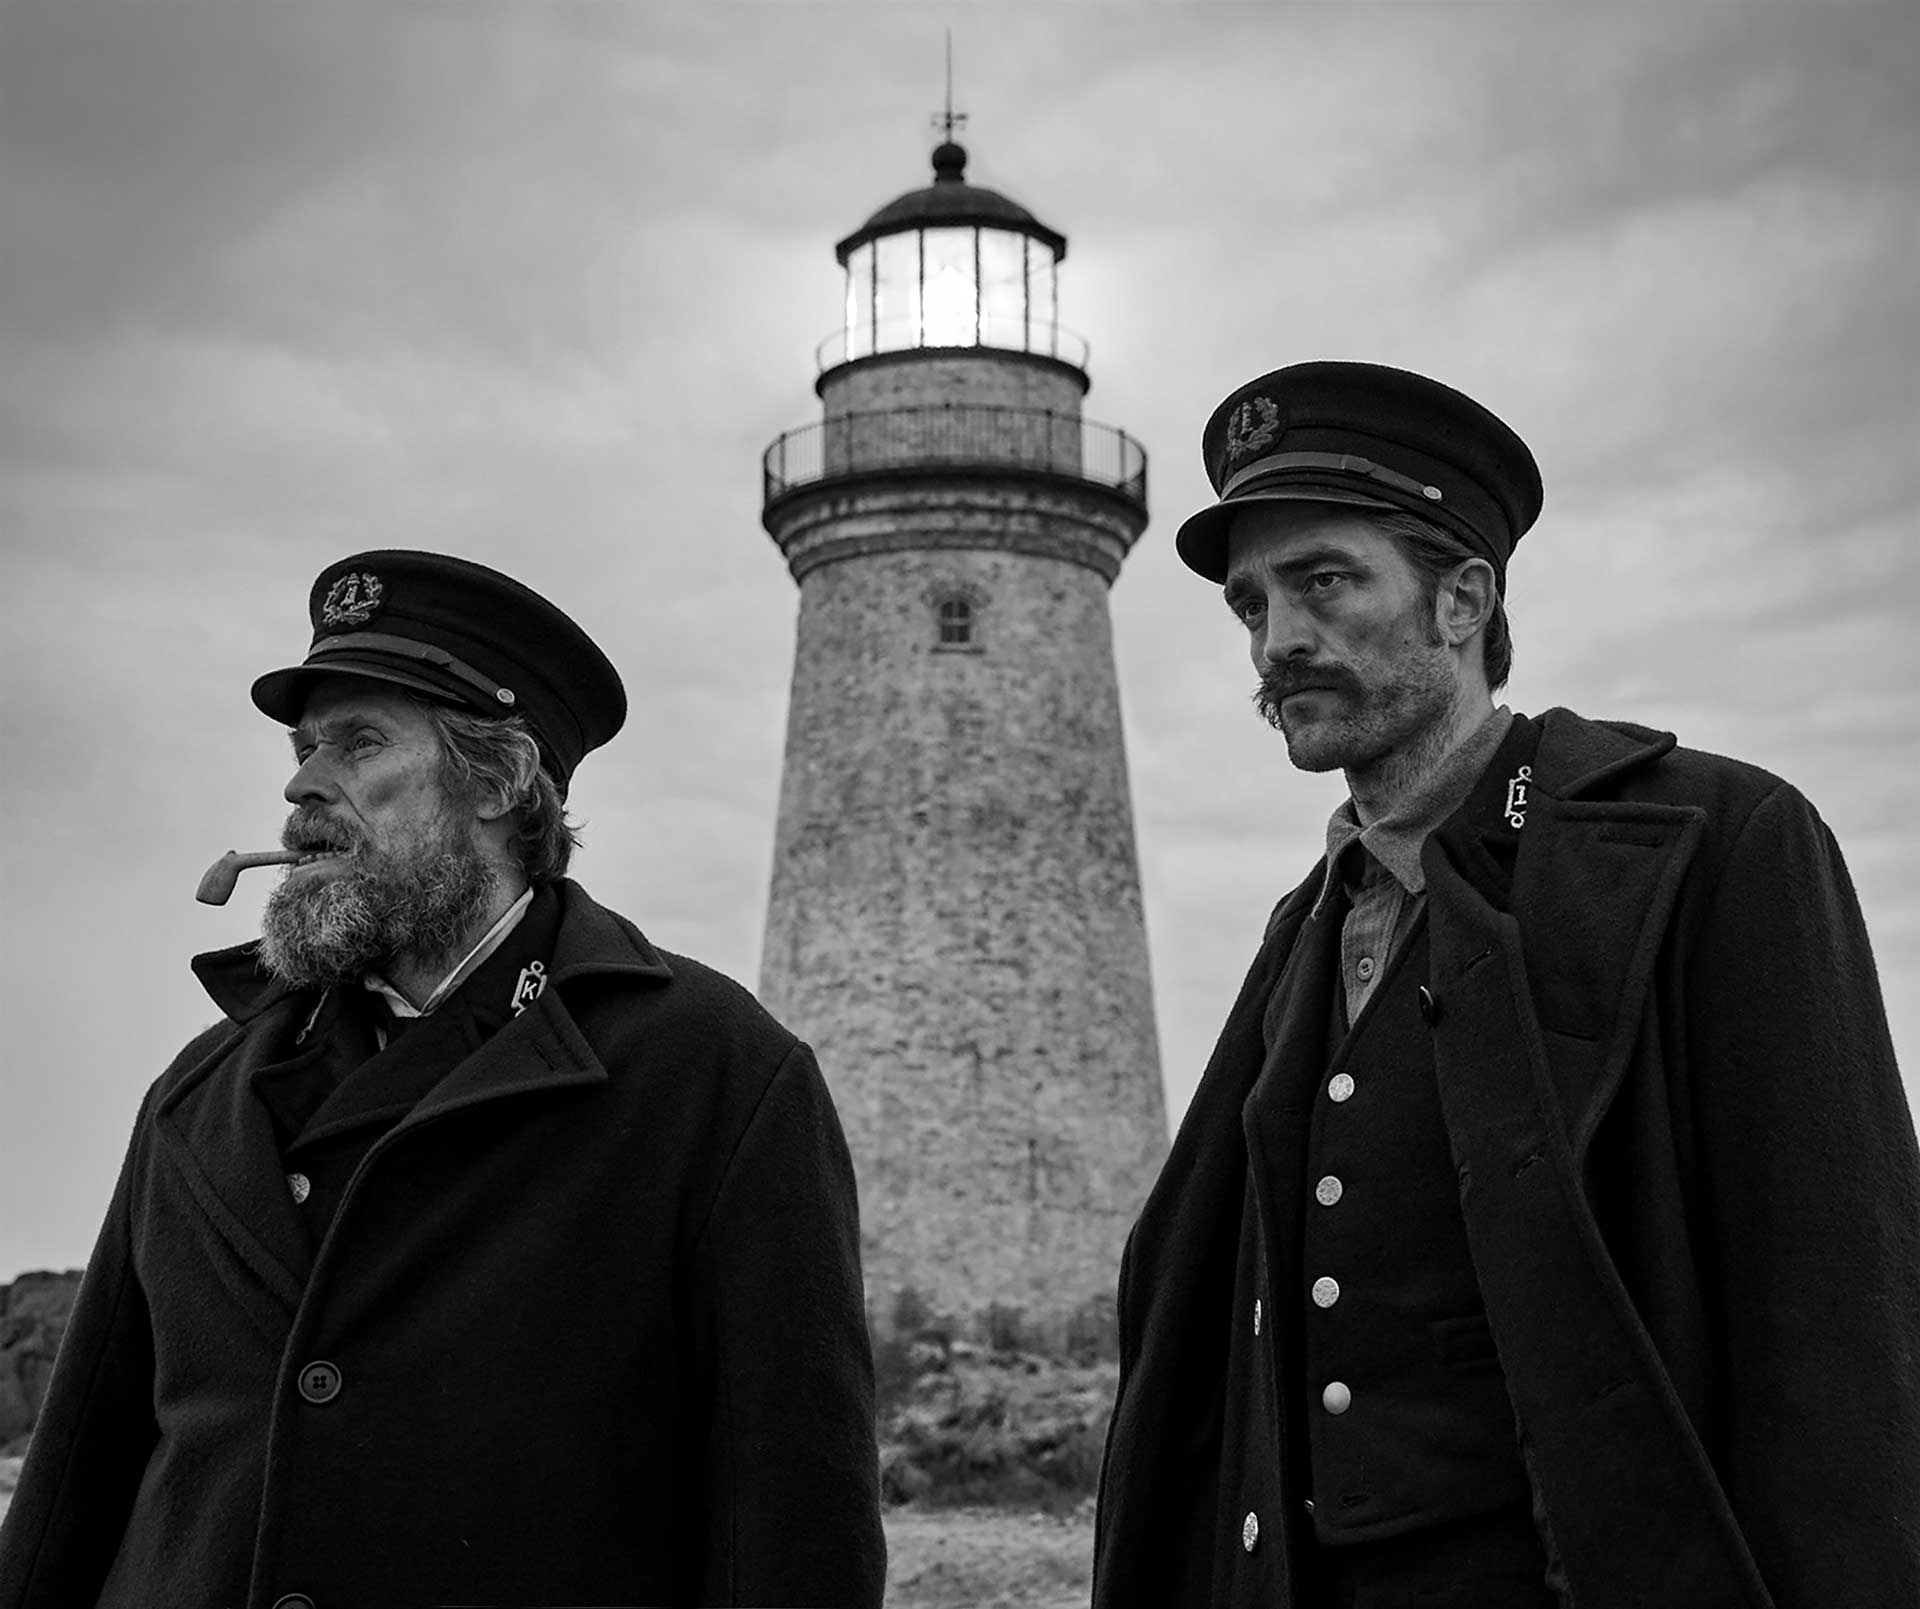 Is The Northman Comparable To The Lighthouse As Robert Egger Follow-Up Film